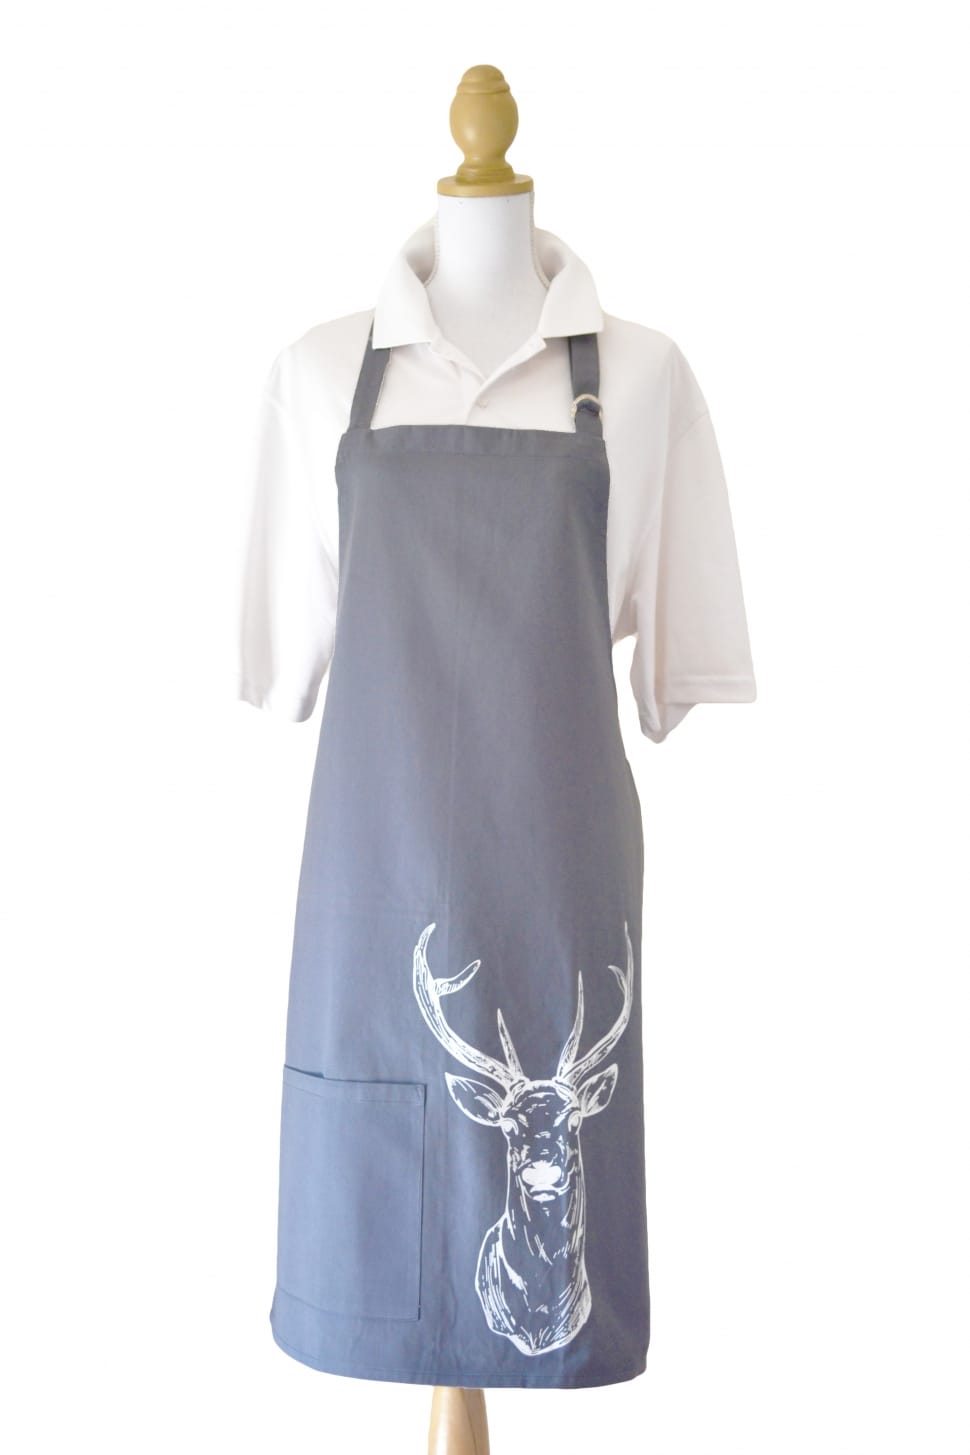 white polo shirt and grey stag apron outfit preview